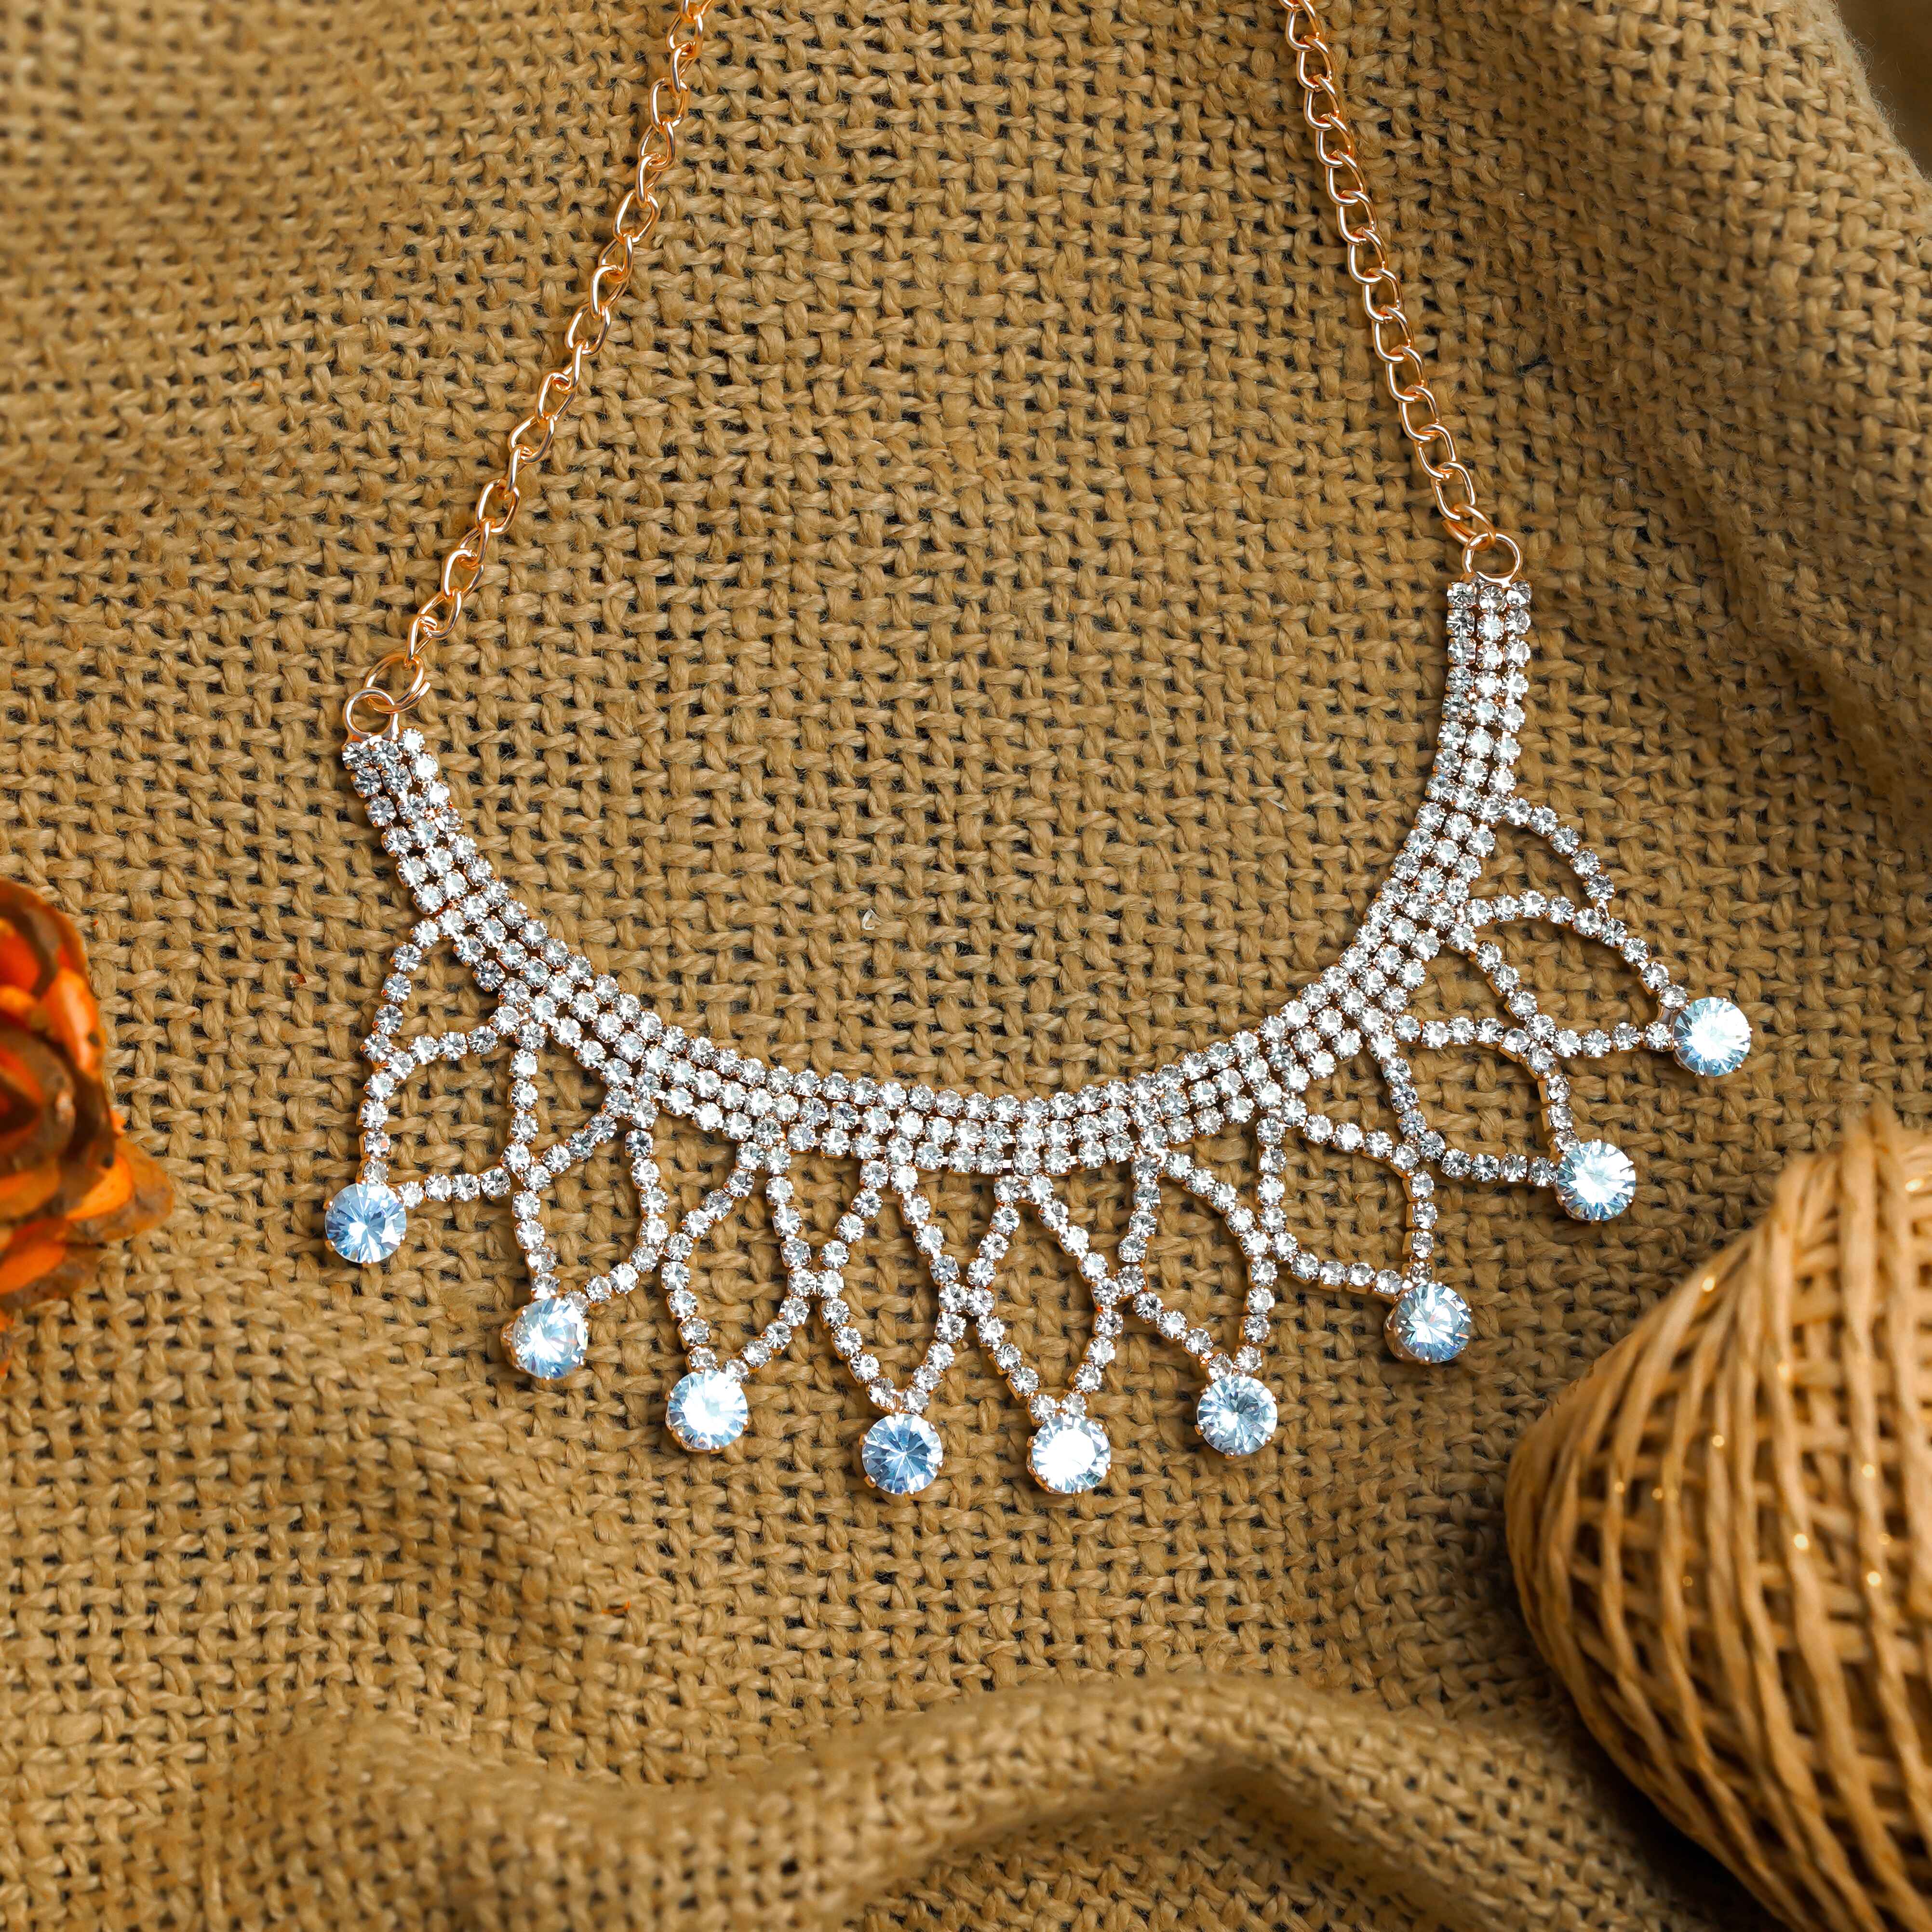 Chic Statements: Make a Statement with Stylish Necklace Sets